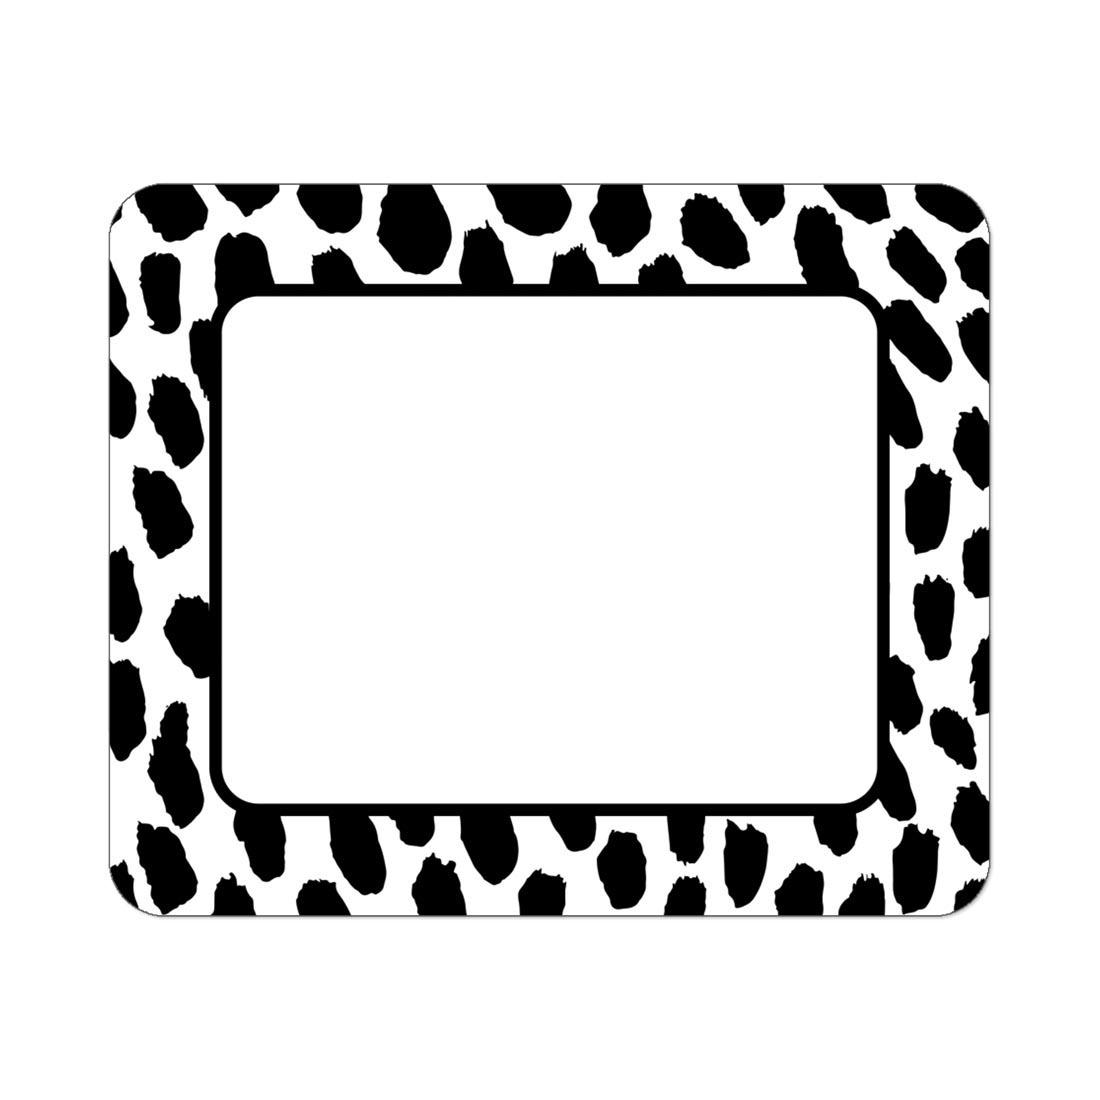 Simply Safari Name Tags By Carson Dellosa, featuring a black and white animal print pattern as a border